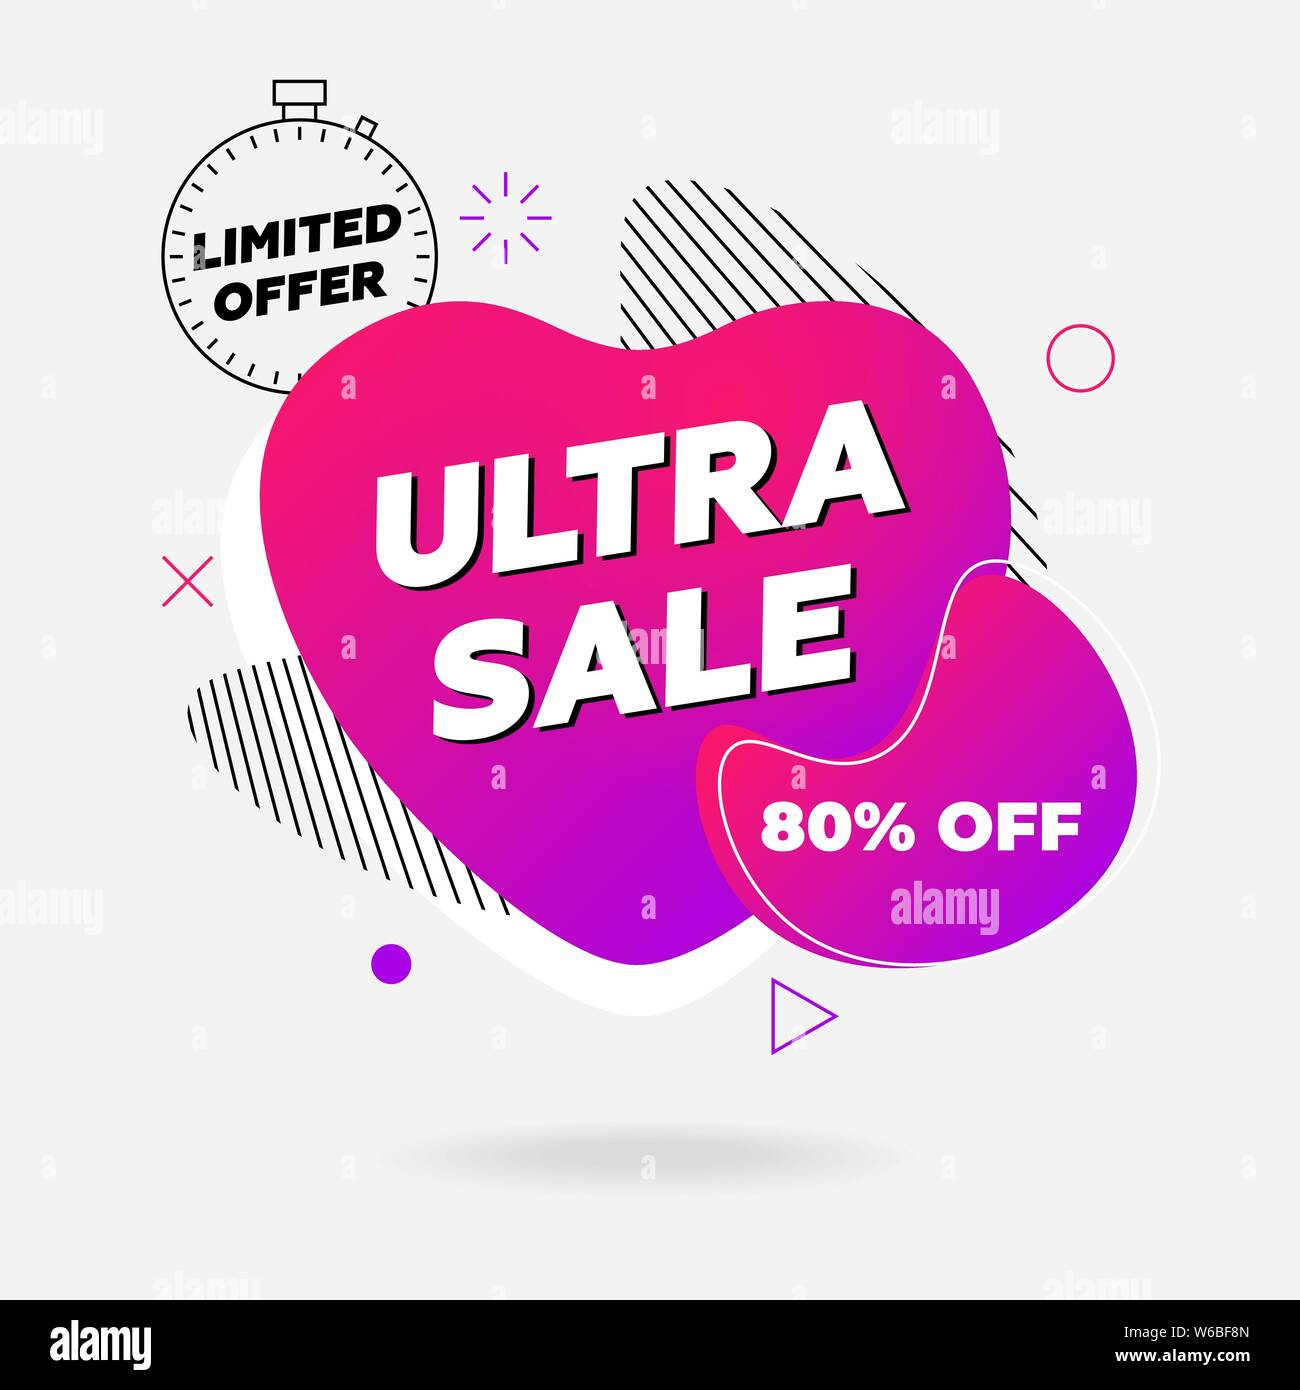 Ultra sale banner. Limited offer template design on purple abstract liquid shape. Flat geometric gradient colored graphic element in heart fluid form on white background. Modern vector illustration Stock Vector